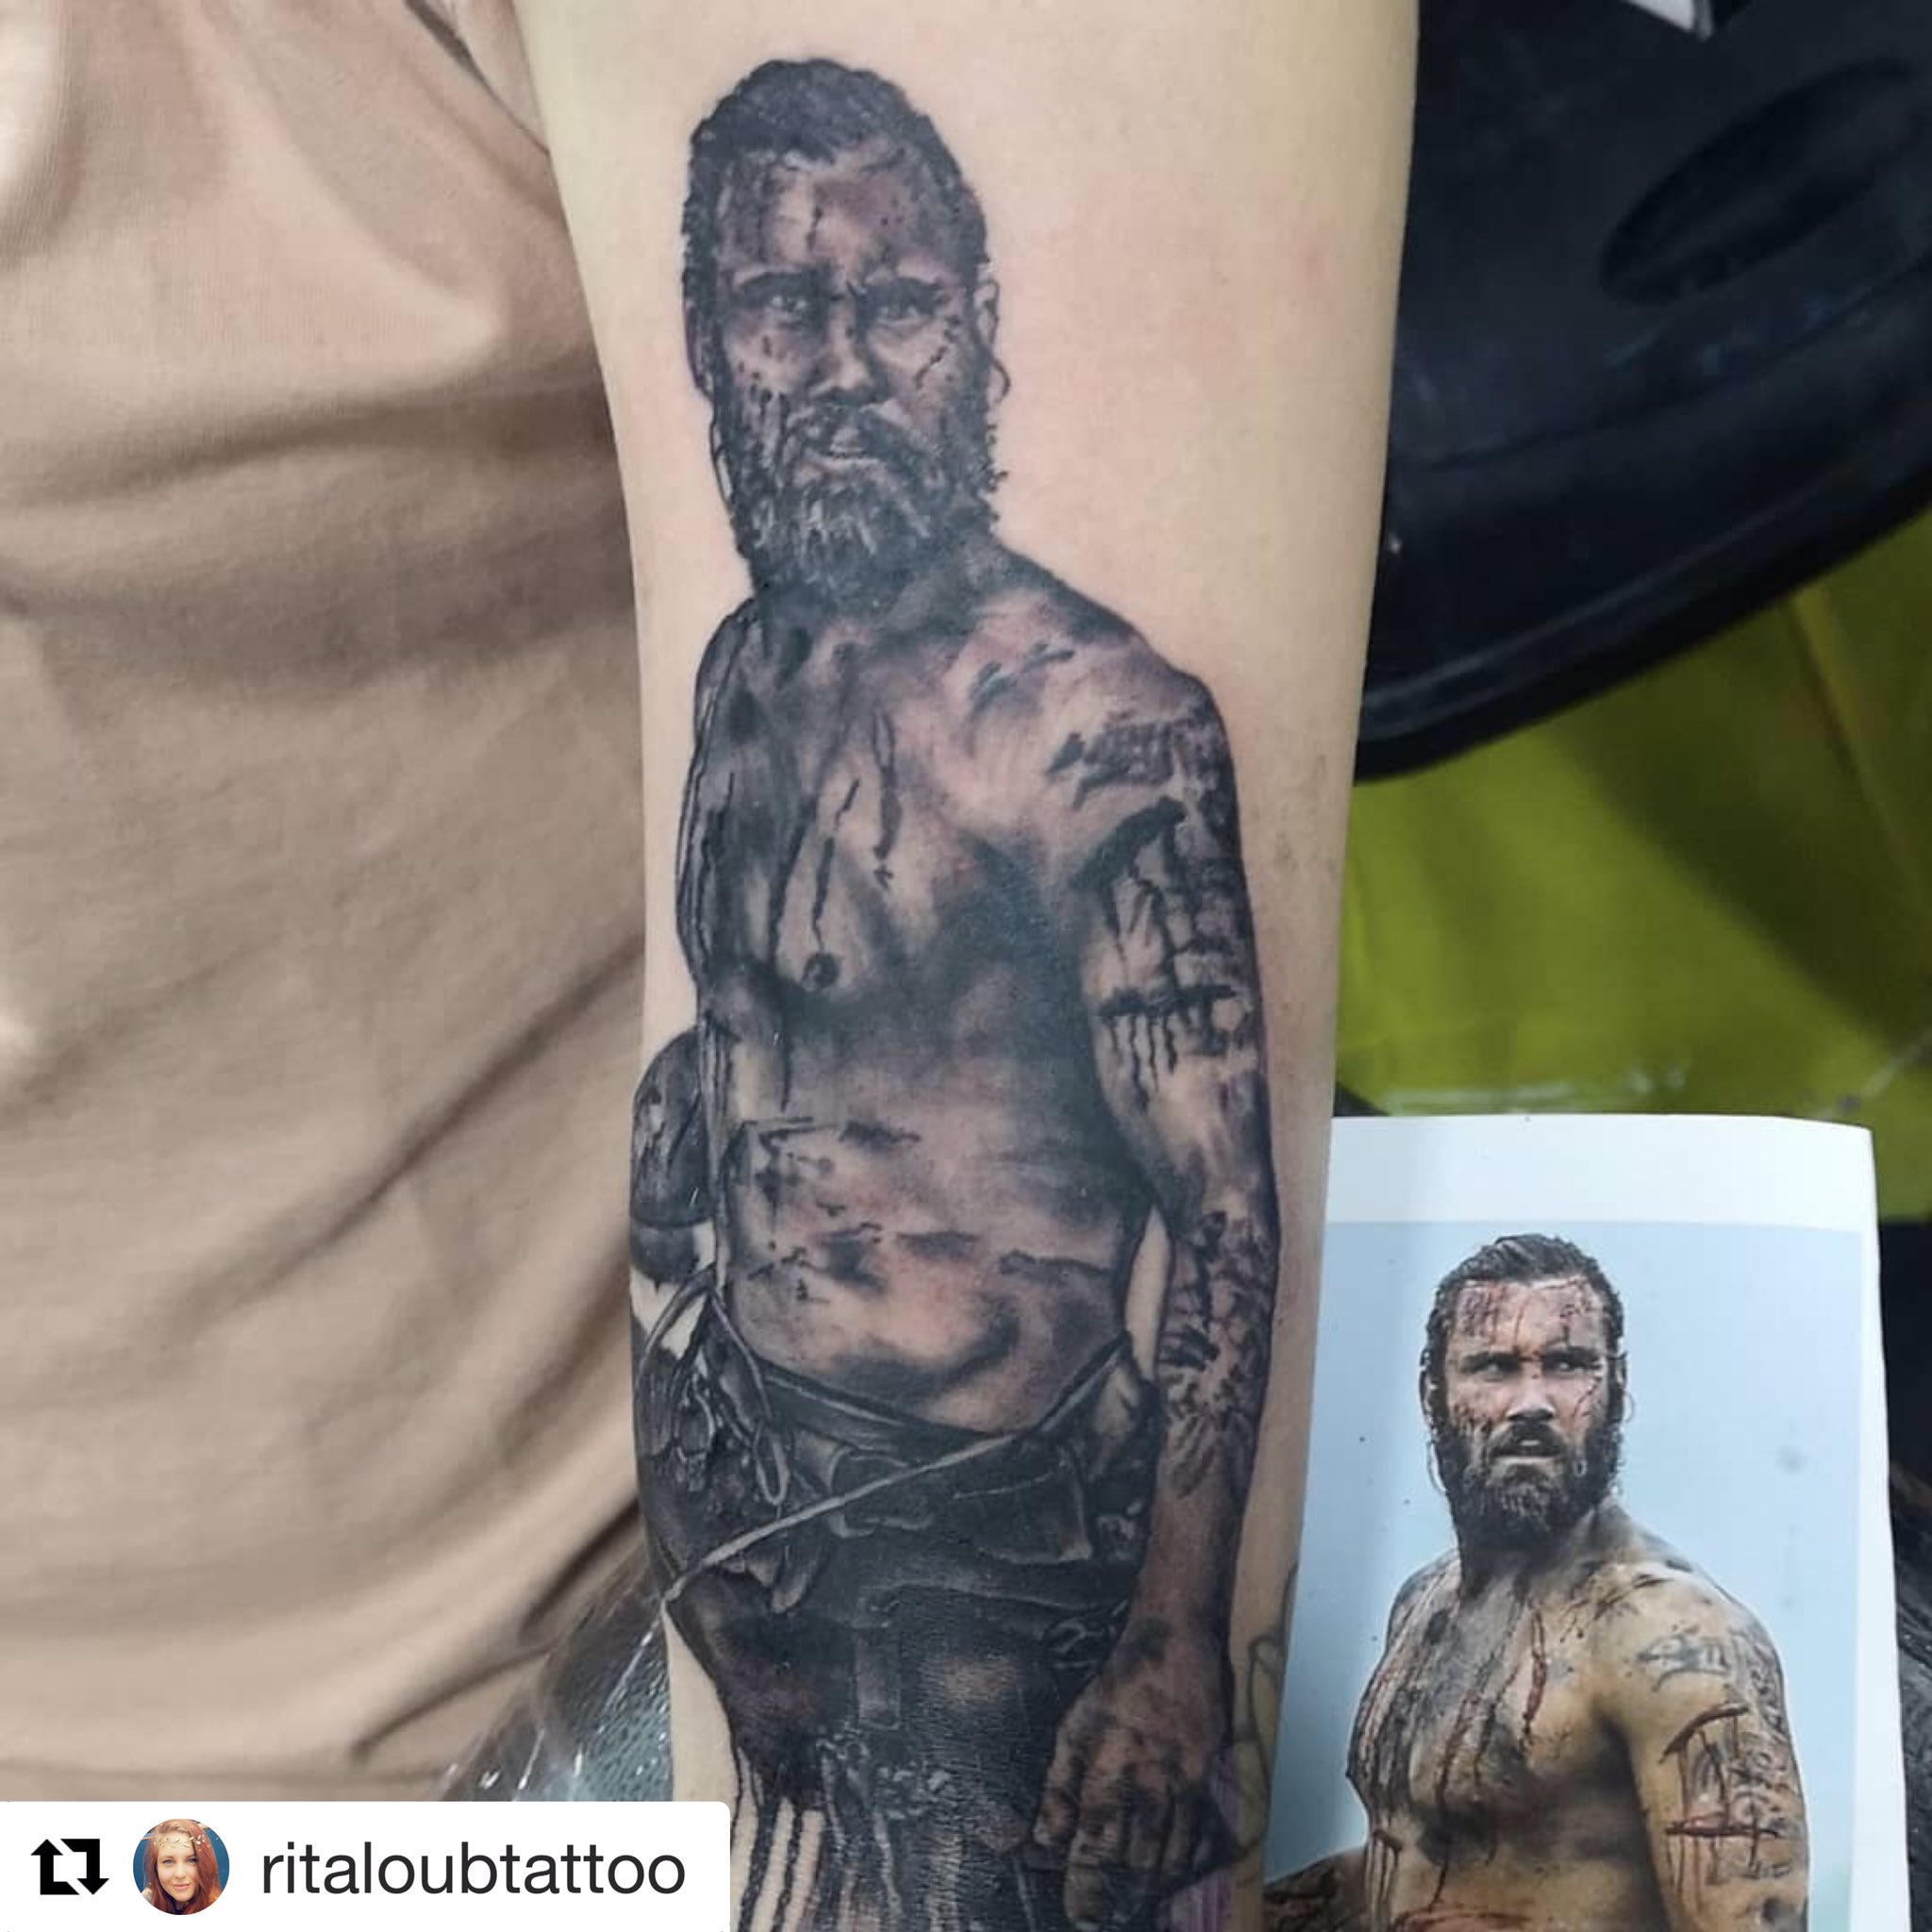 Team Standen on X: "Amazing #Rollo tattoo with thanks to Rita on IG for sharing #Fanartfriday #Vikings #CliveStanden https://t.co/8ZtxeEzEkk https://t.co/Cy39DlSqwC" / X